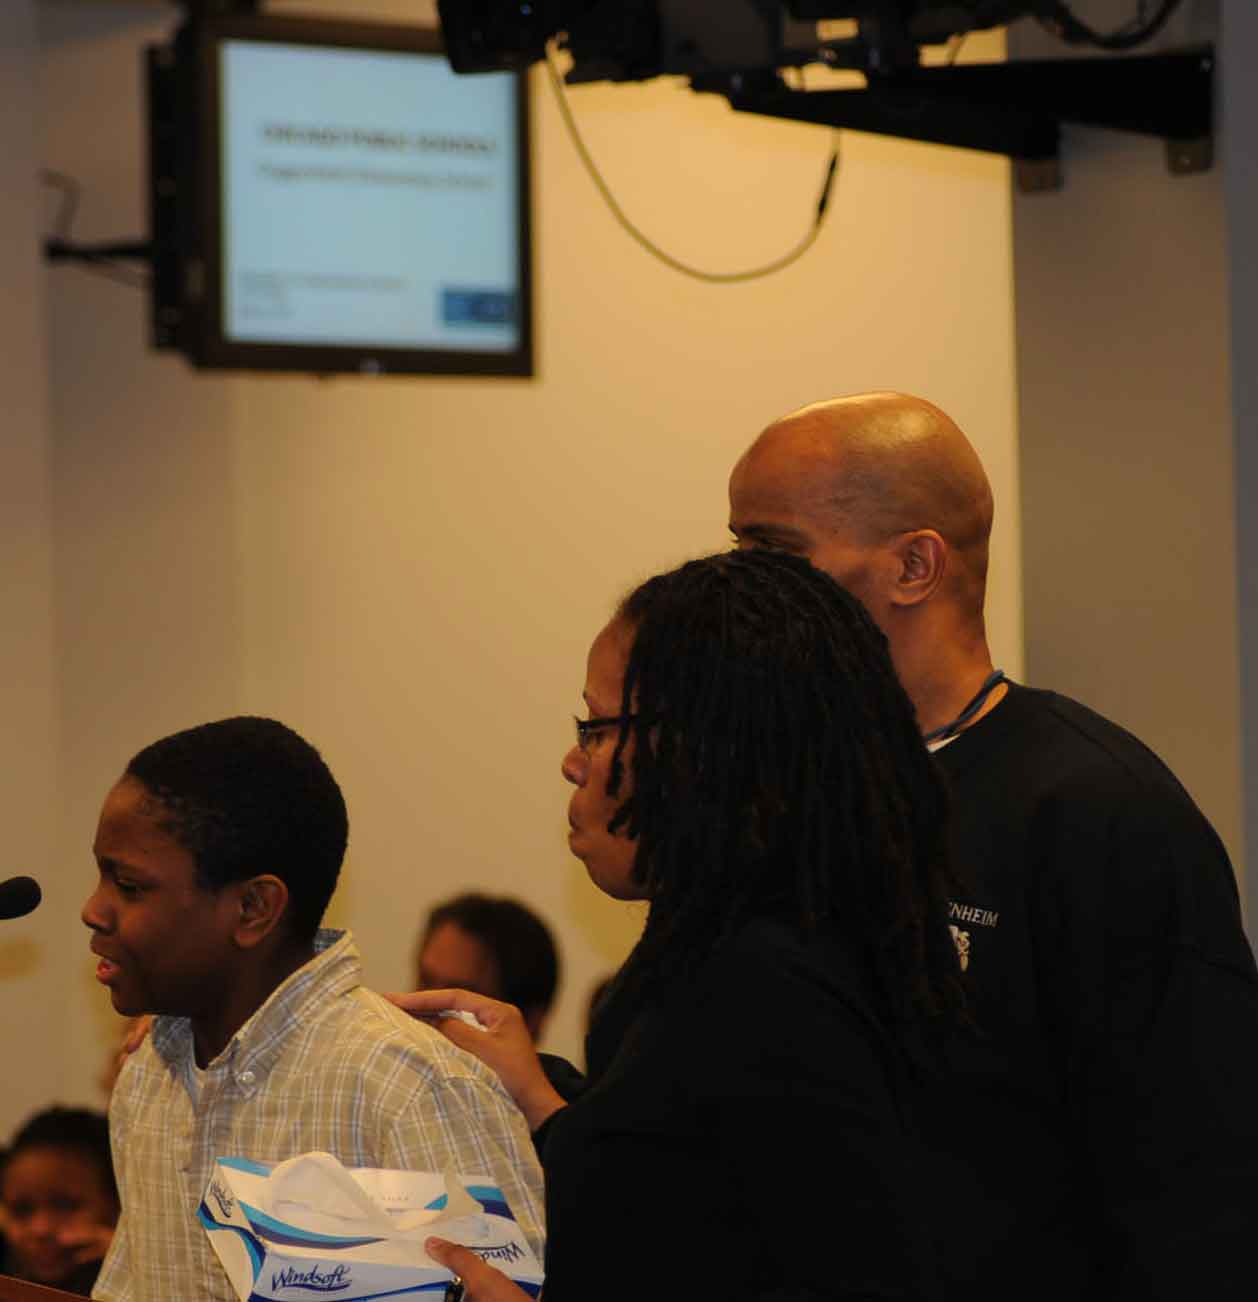 When one of the students who testified against the closing of Guggenheim Elmentary School broke down in tears during the January 29, 2010 hearing, teachers Jacqueline Jones and Earnest Jones brought tissues and comfort to him. Substance photo by George N. Schmidt.